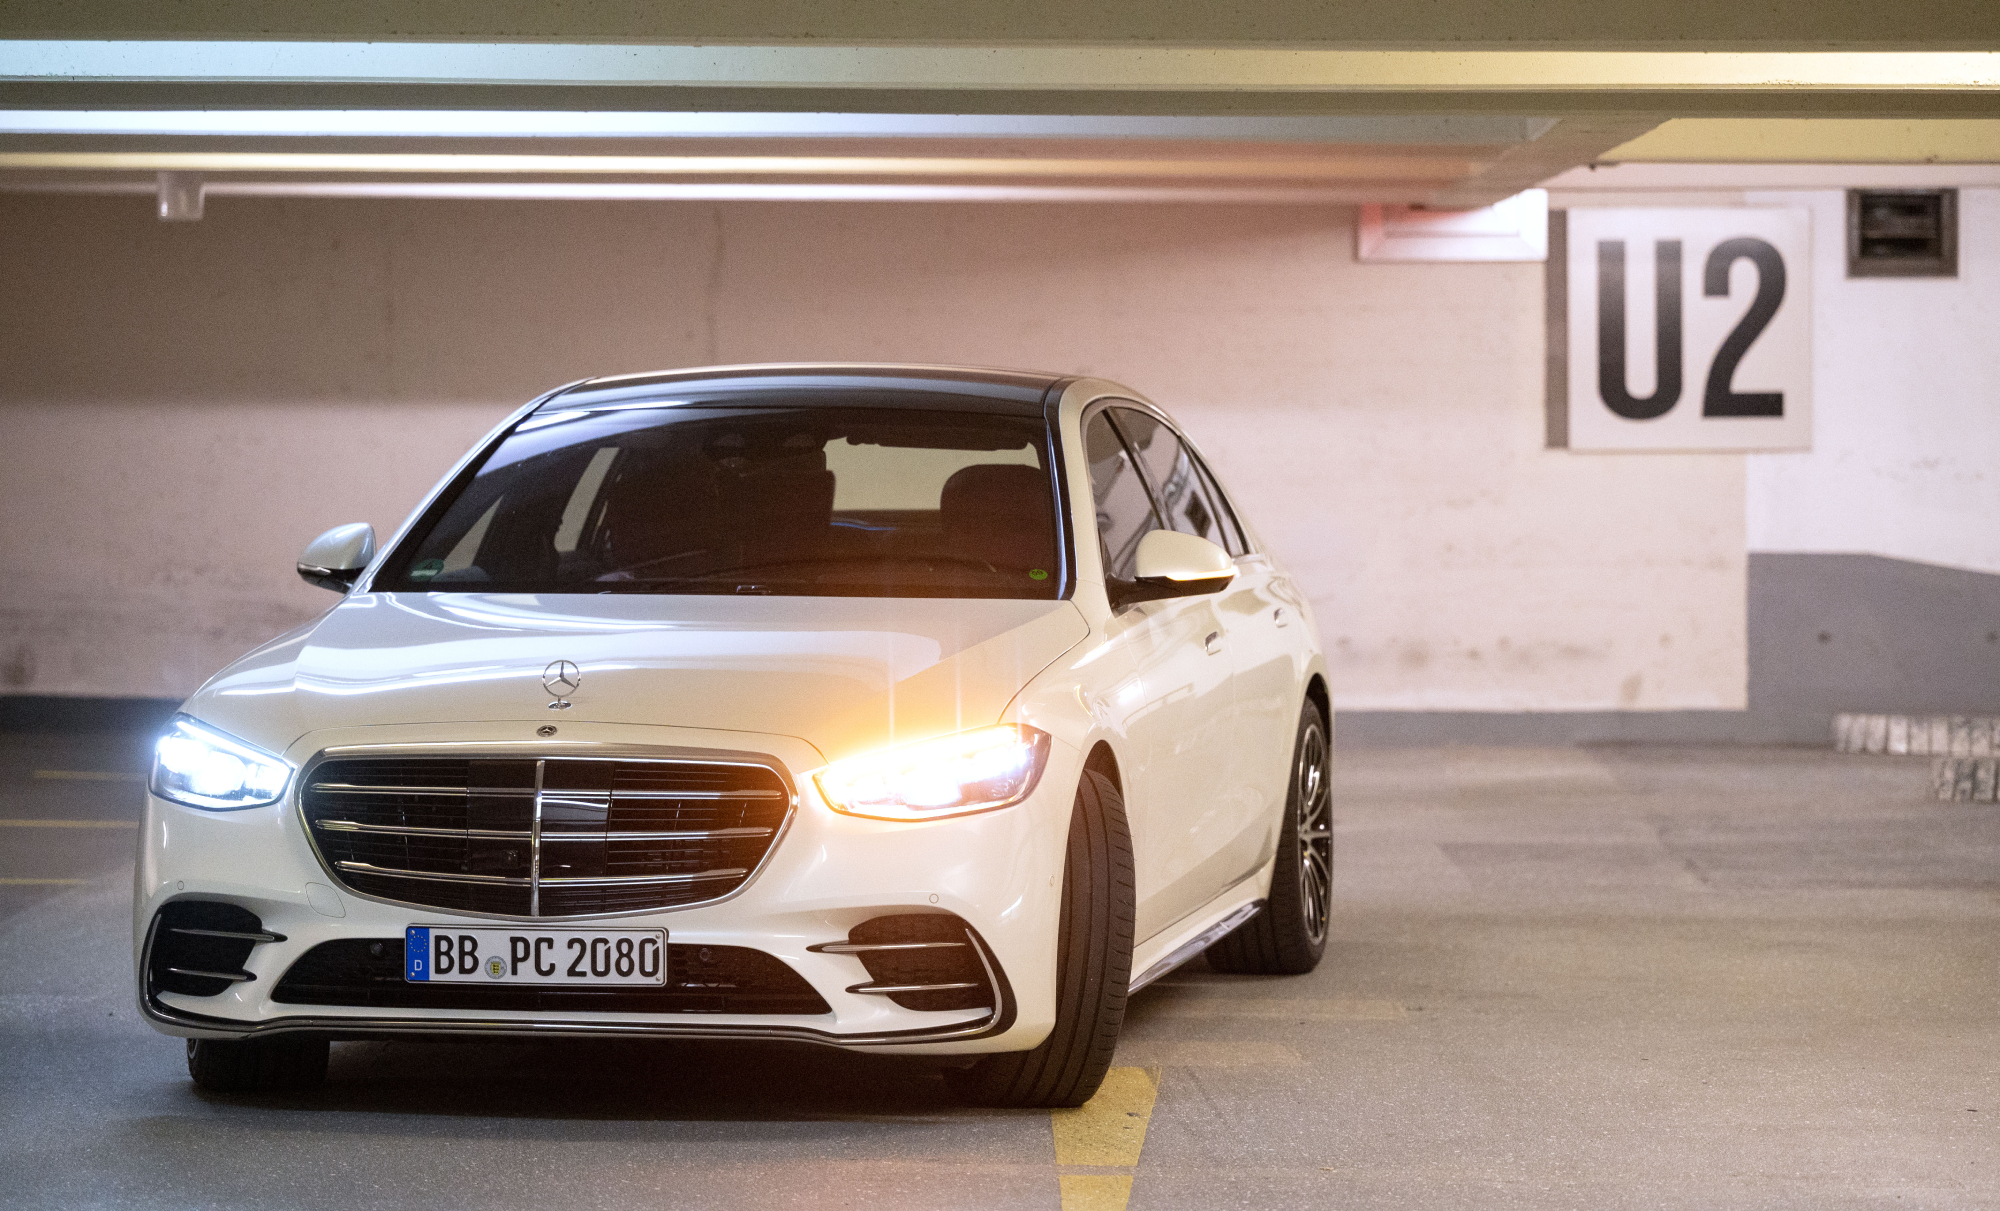 The Best Super Luxury Car options include the Mercedes-Benz S-Class